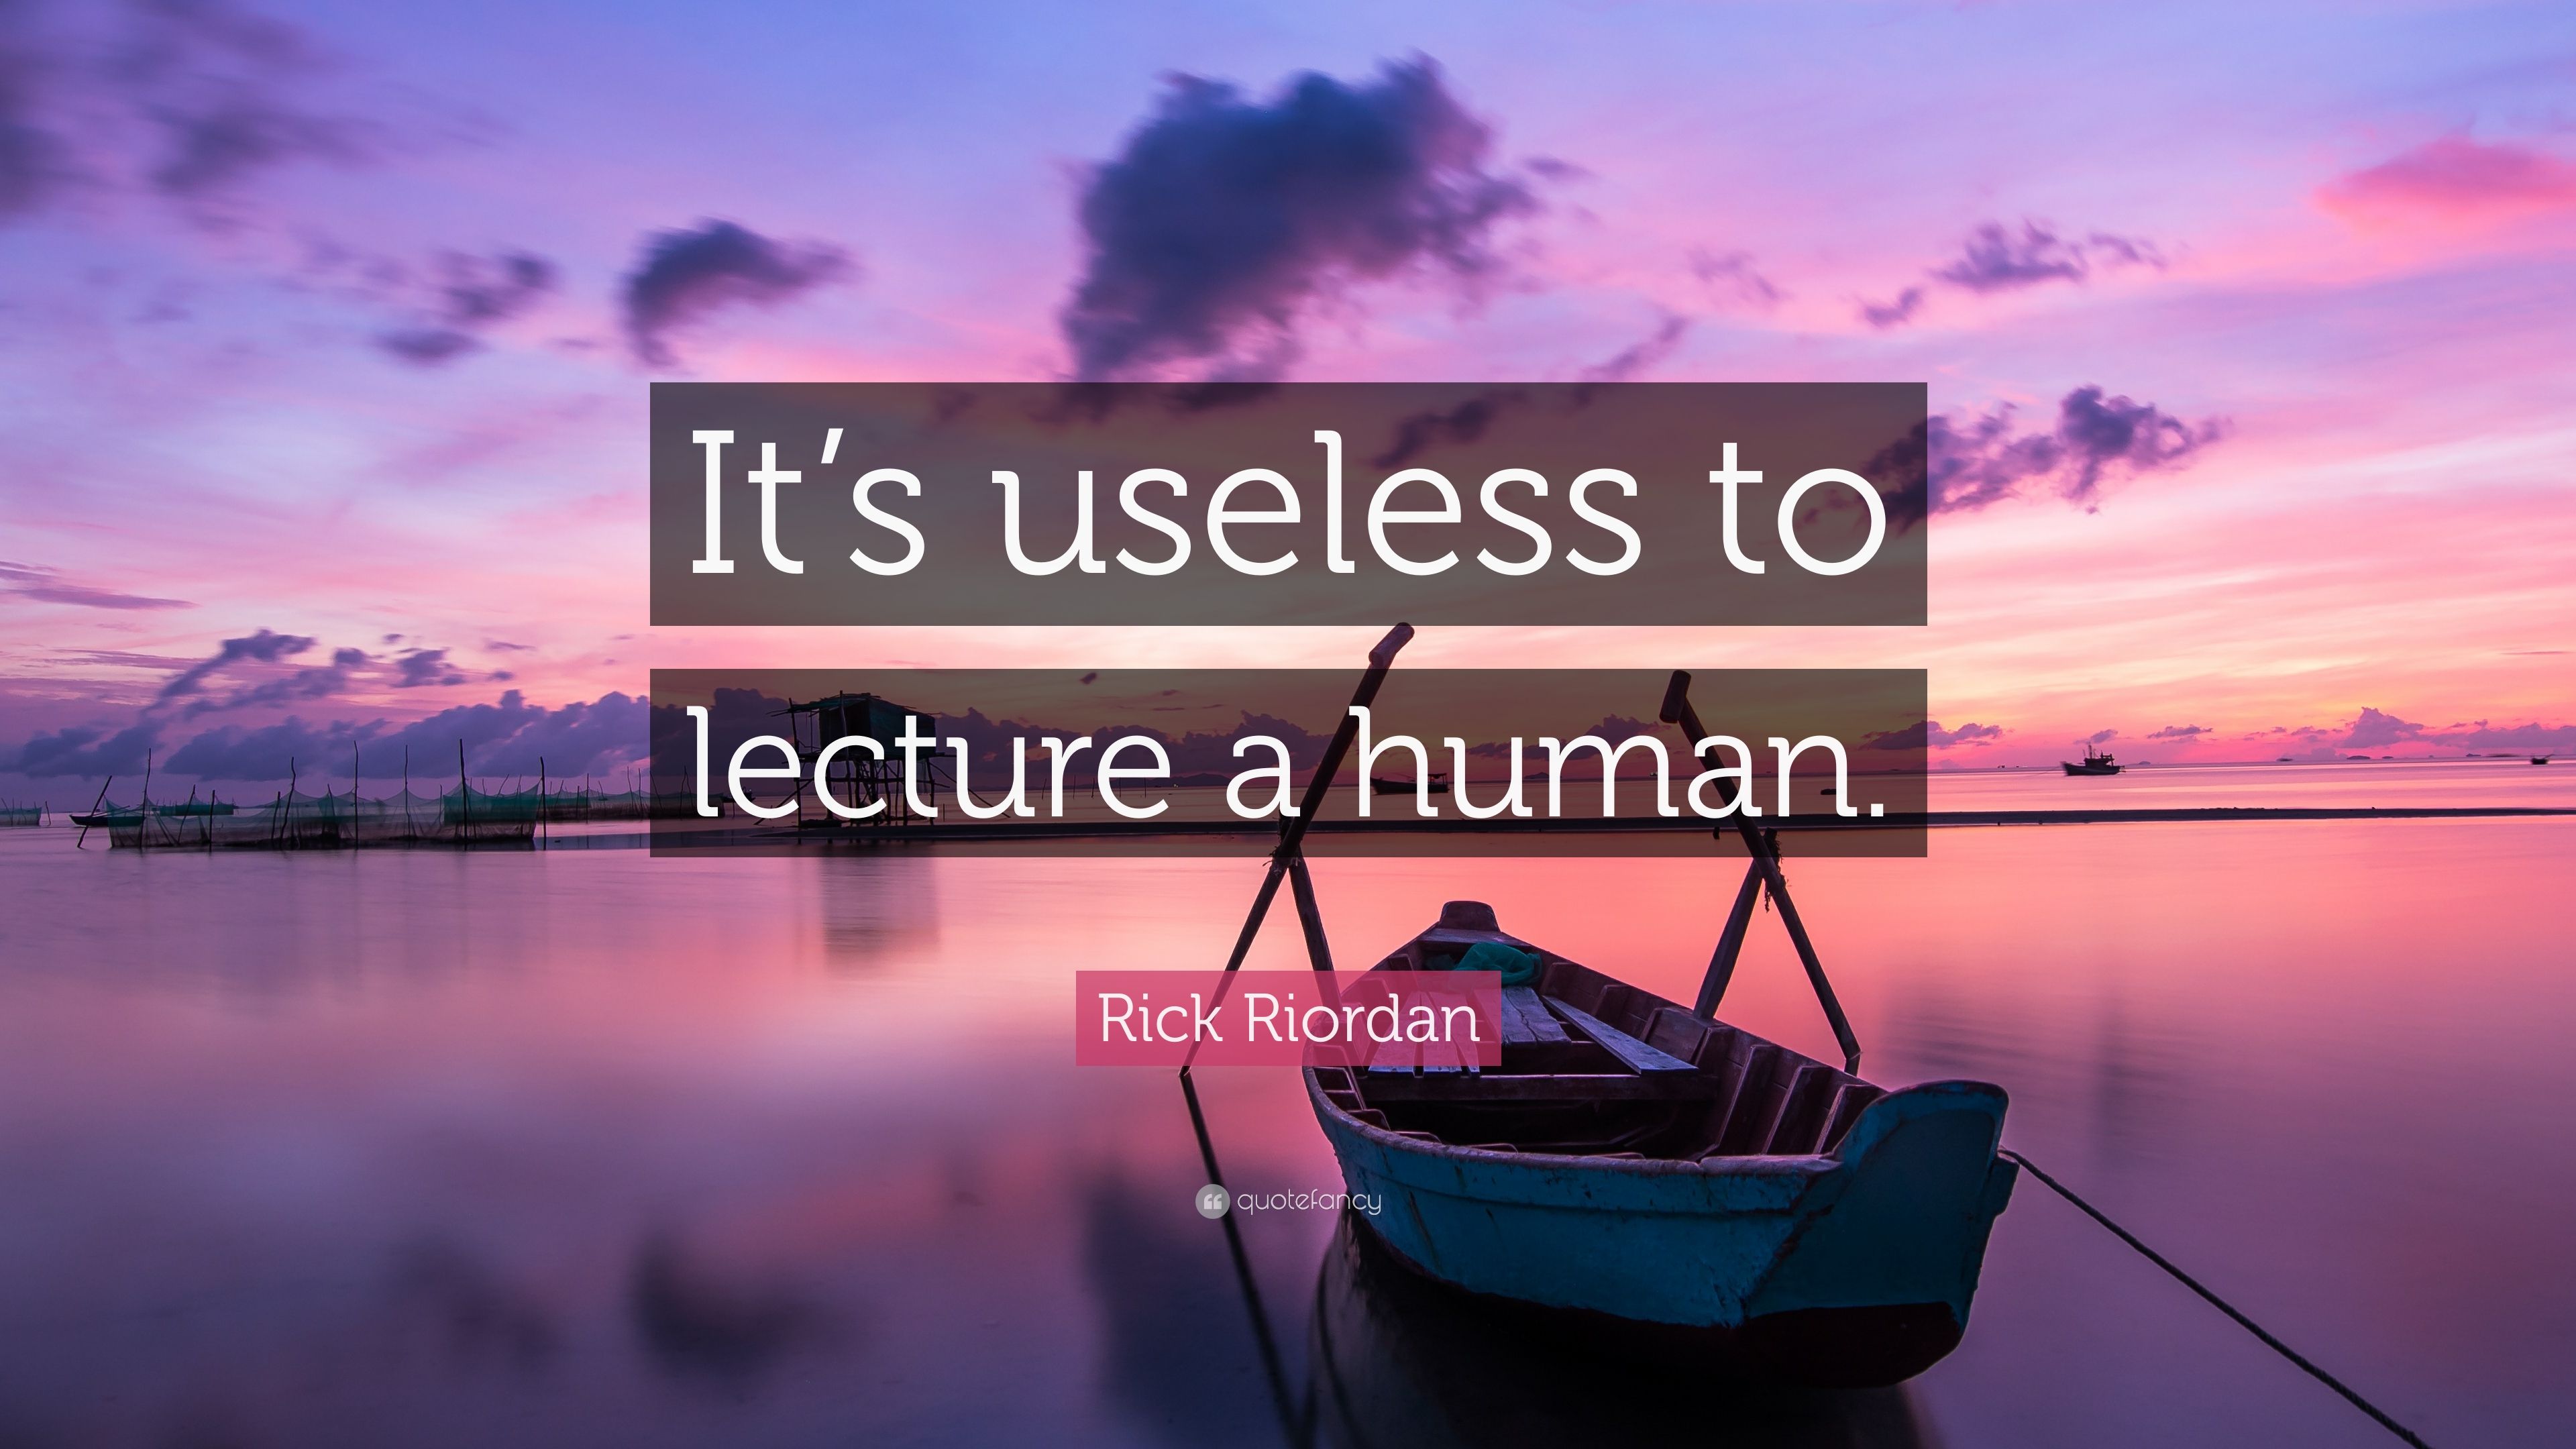 Rick Riordan Quote: “It's useless to lecture a human.” (6 wallpaper)